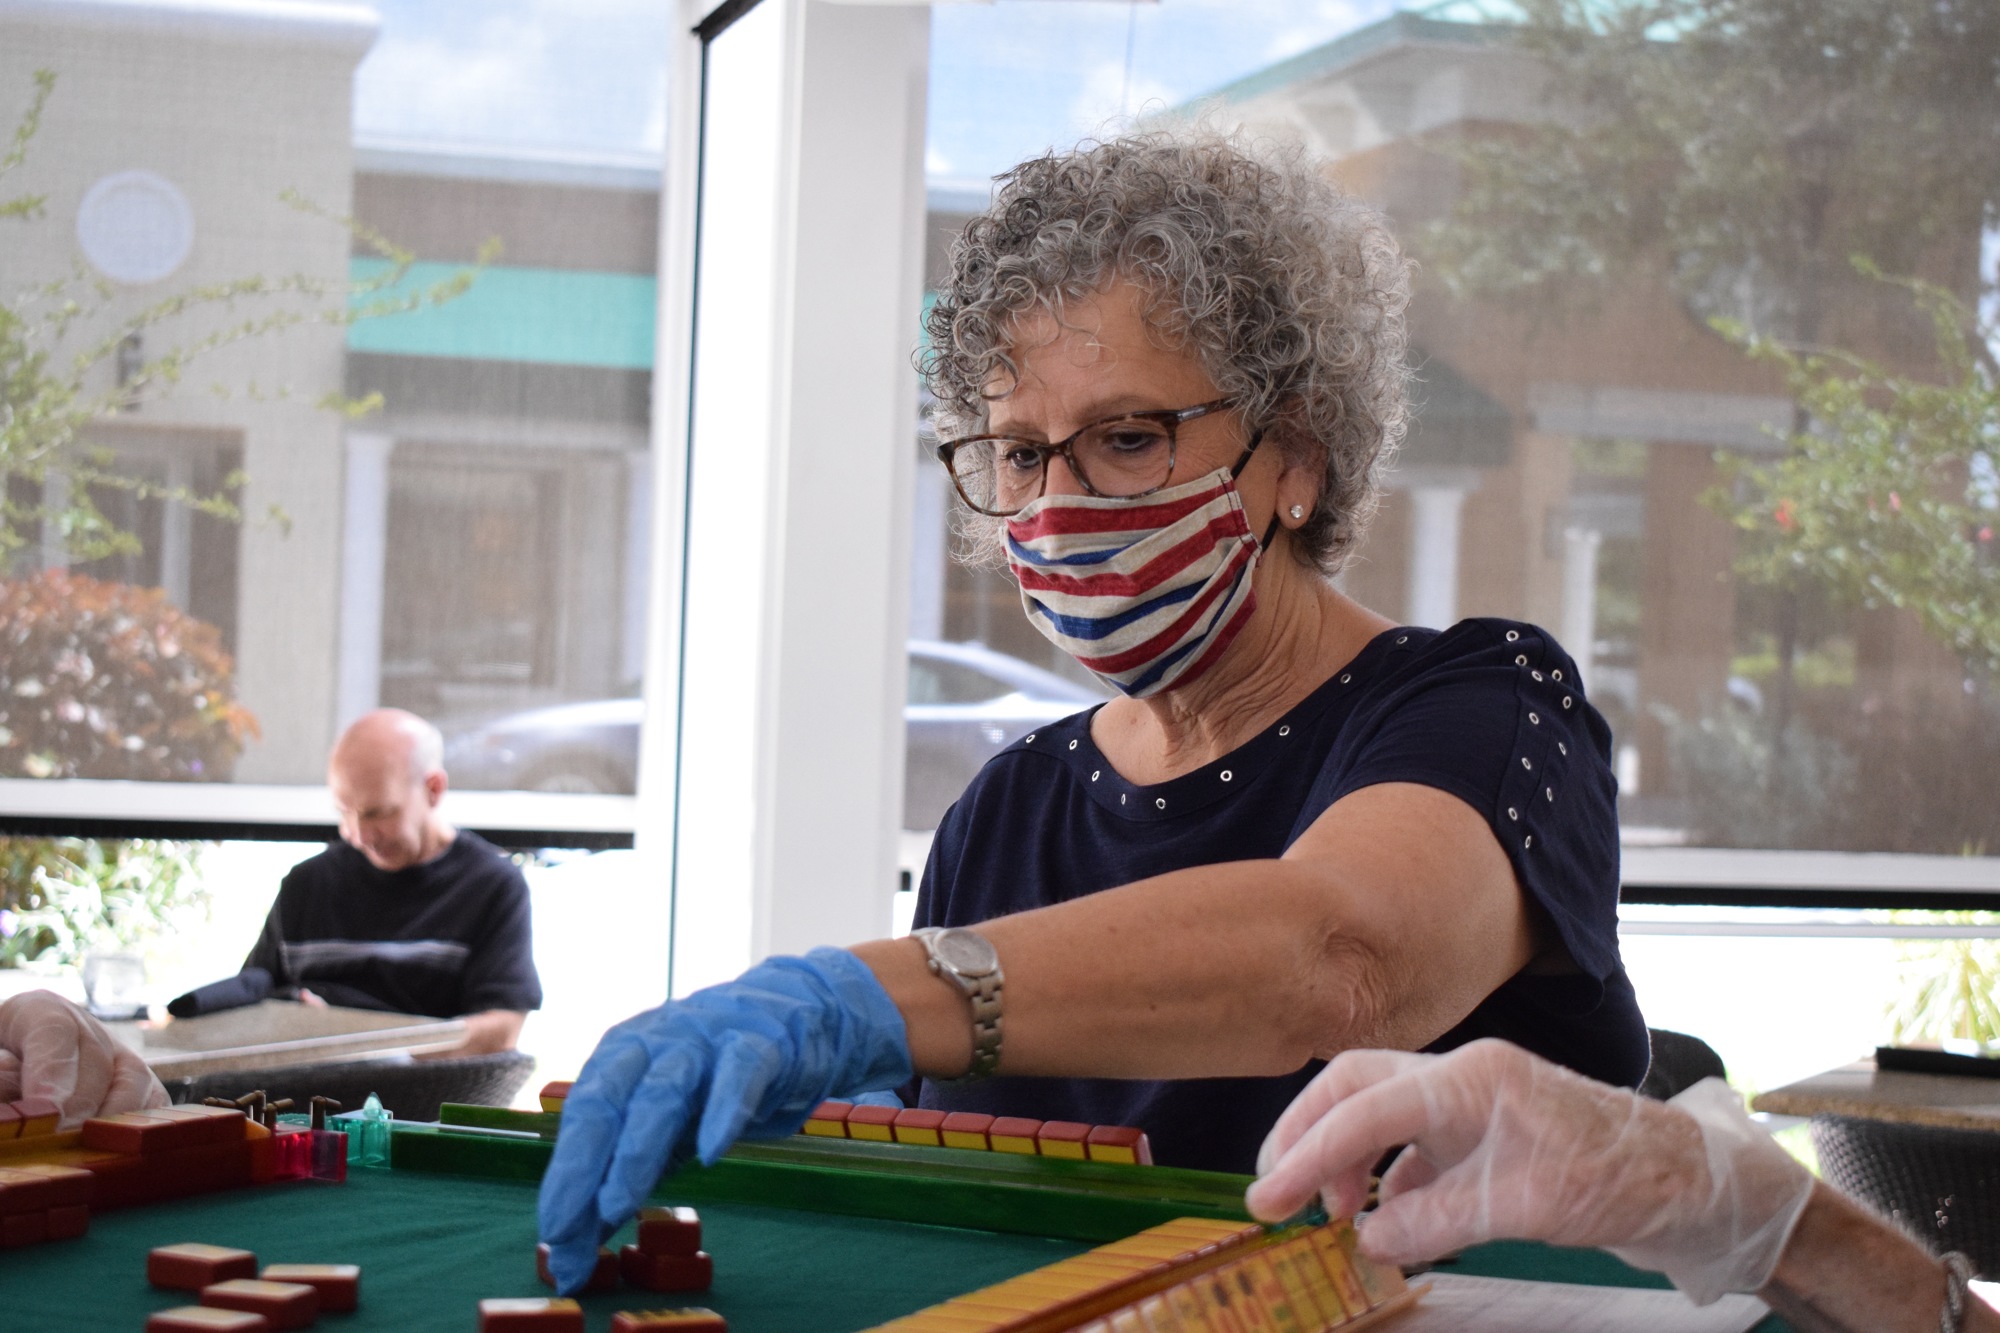 Helene Levin says the mahjong players have become a support group to help each other during trying times. The group stopped meeting in person for three months due to COVID-19 but now meet at the Grove to support local businesses.